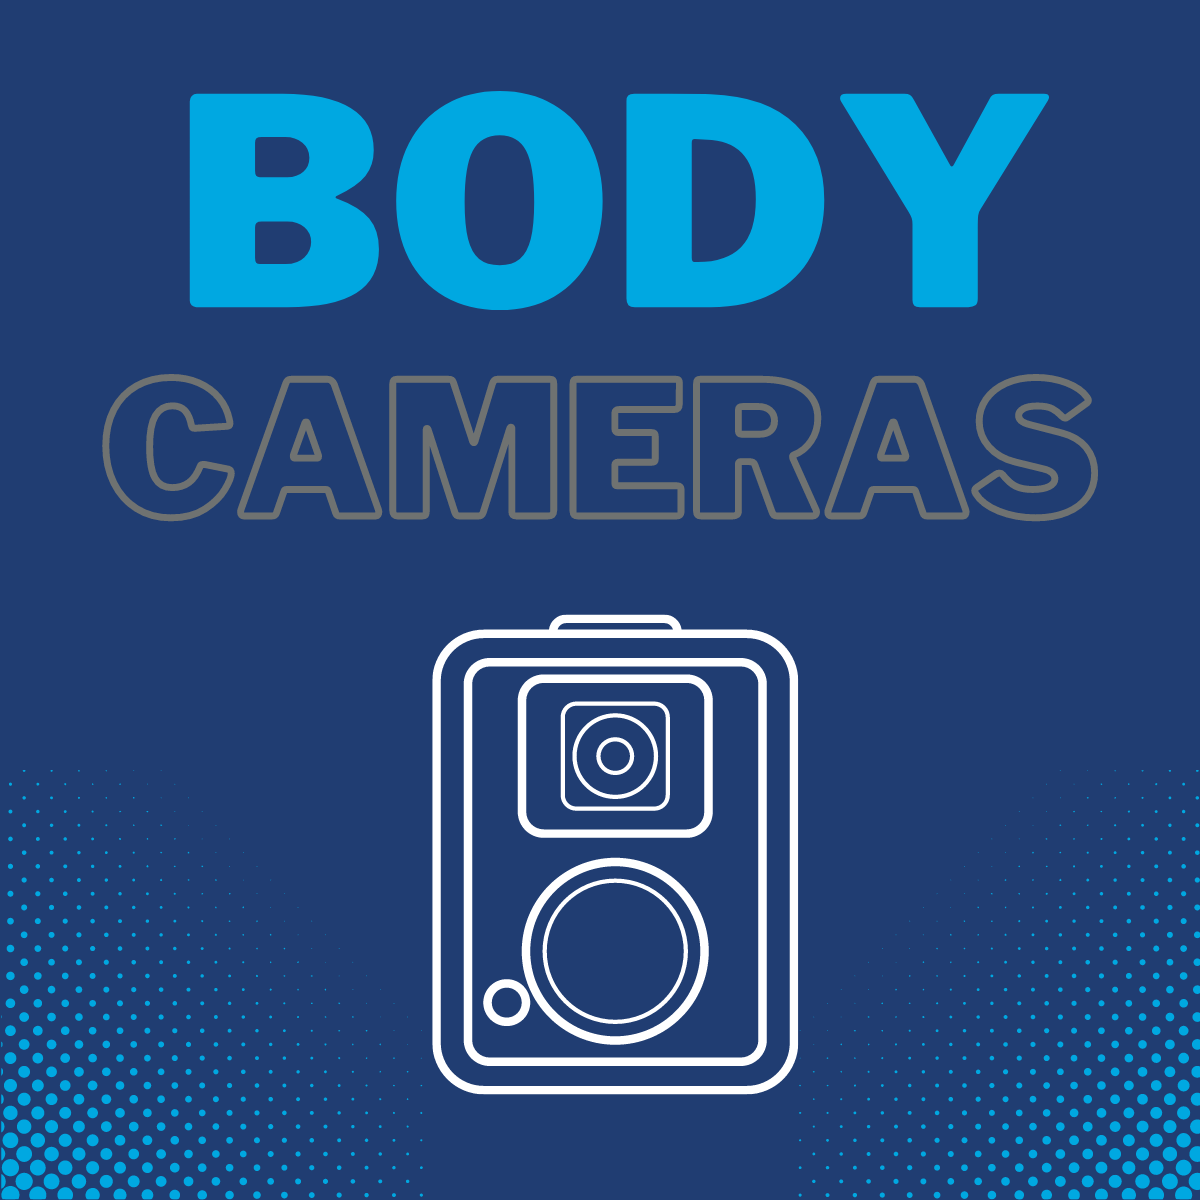 Body Cameras: What's Behind Their Rapid Growth?